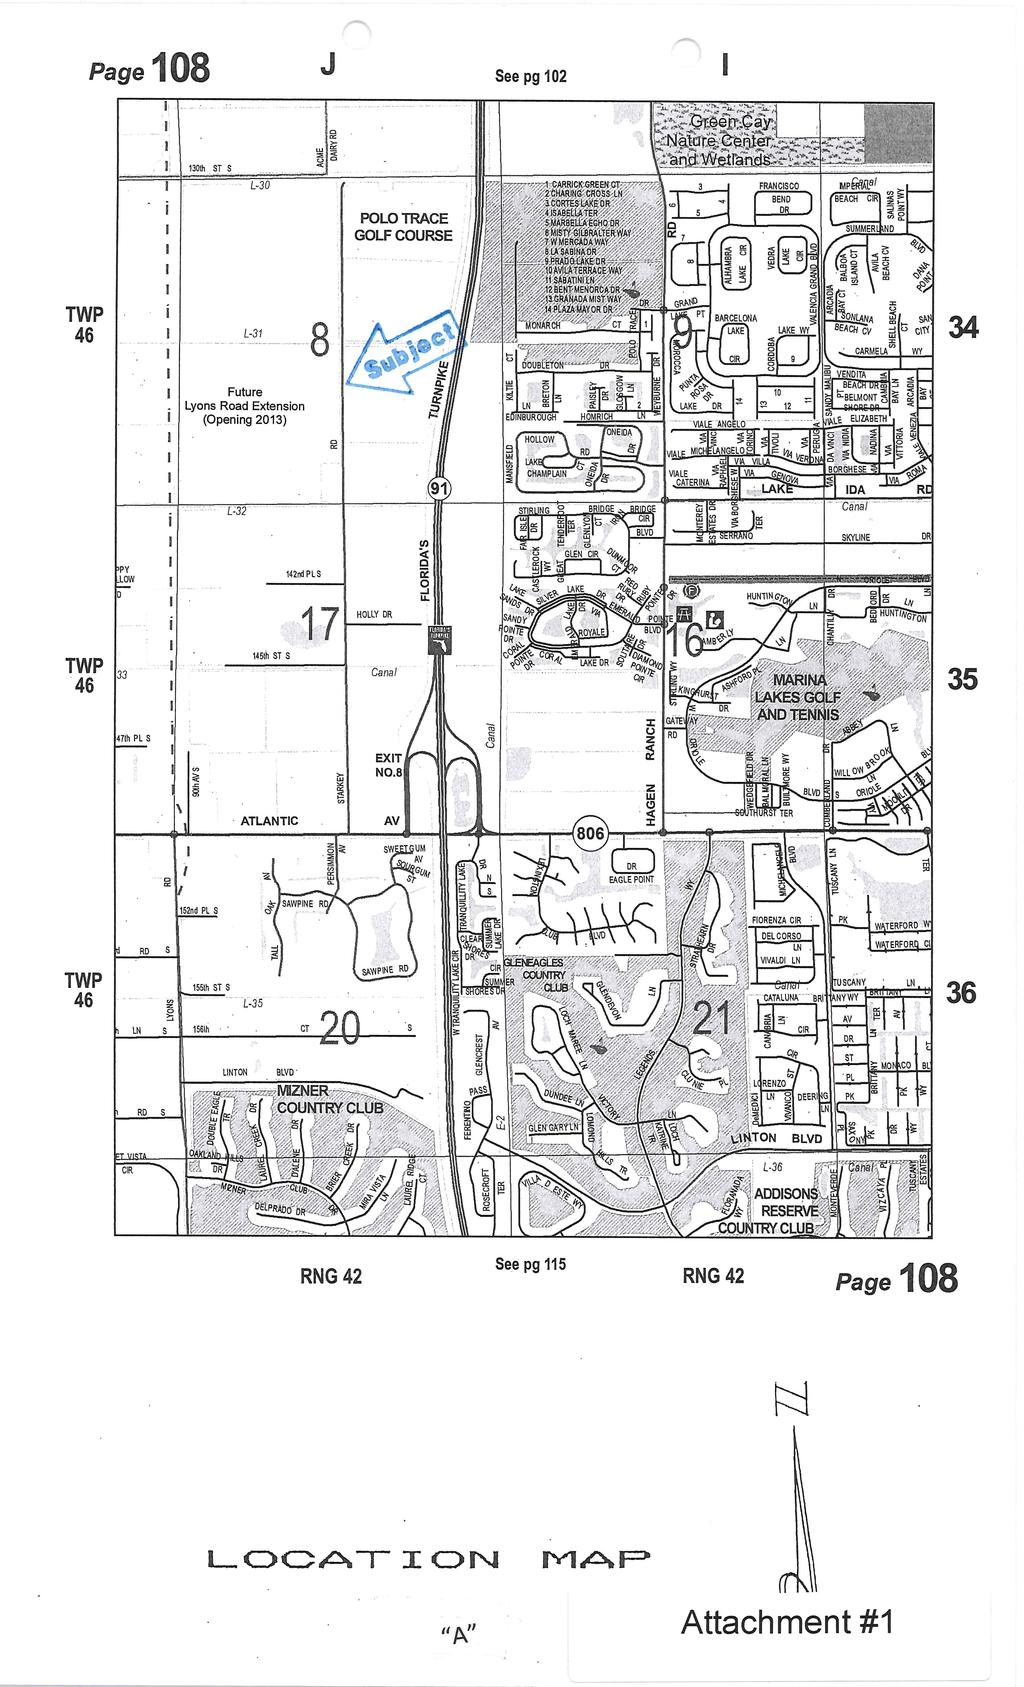 Page 108 : J See pg 102 130th _SJ S_ L-30 POLO TRACE GOLF COURSE 46 34 L-31 Future Lyons Road Extension (Opening 2013) Cl a:: DR Cl) PY LOW ii: 142nd PL S. 0.